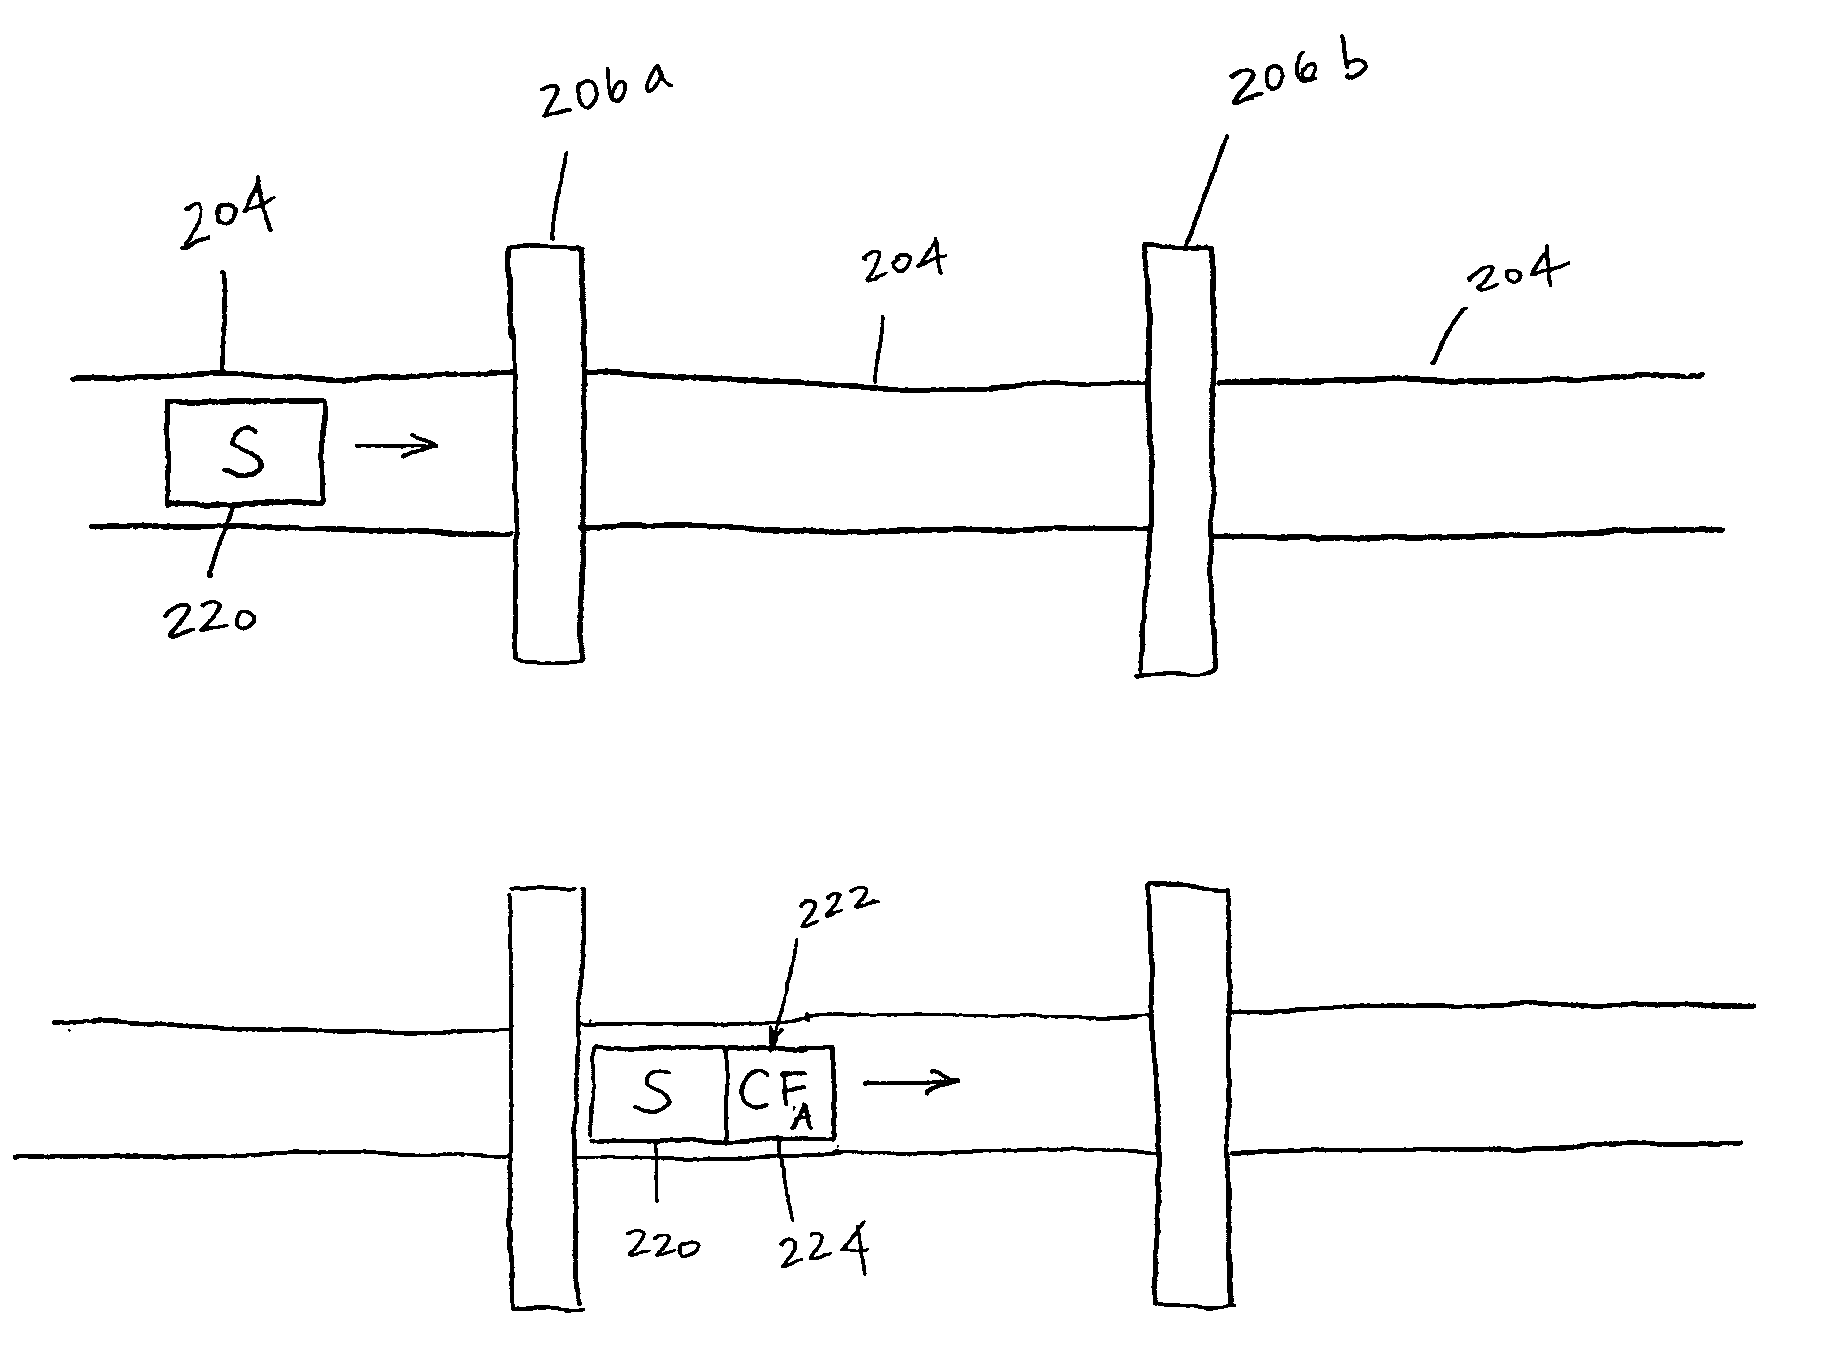 System and method for obtaining optical signal information